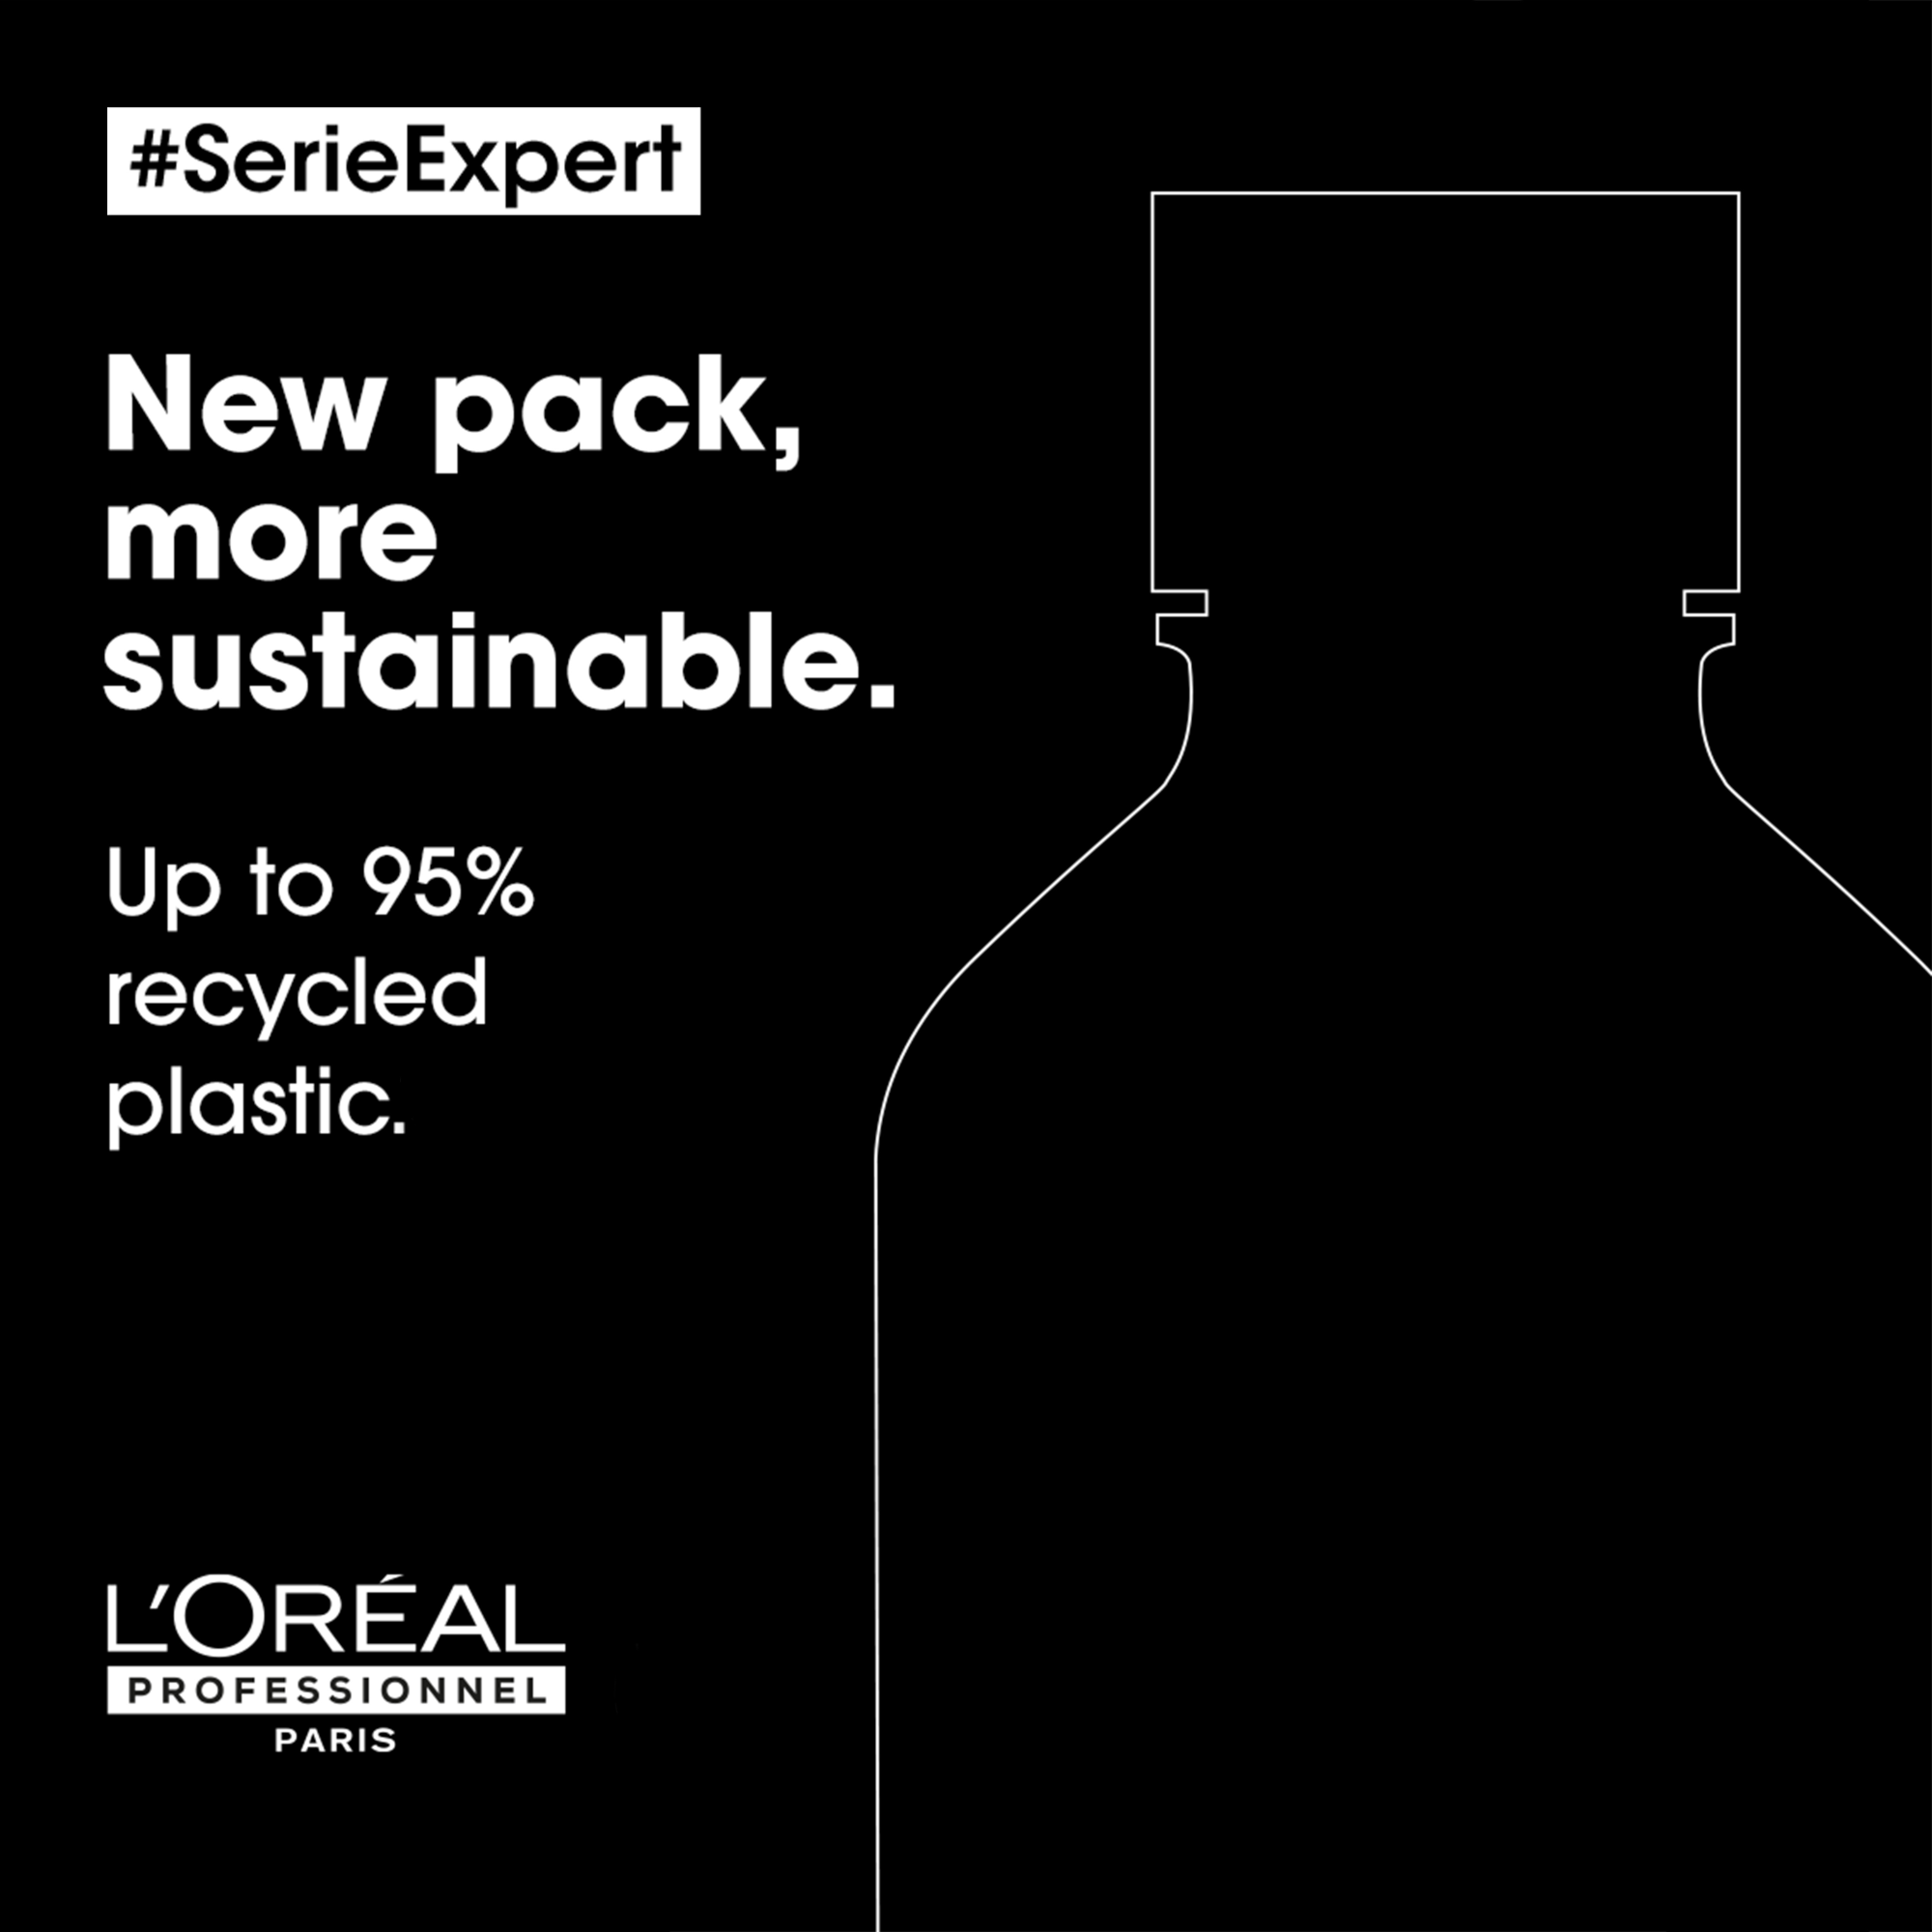 New pack, more sustainable. up to 95% recycled plastic